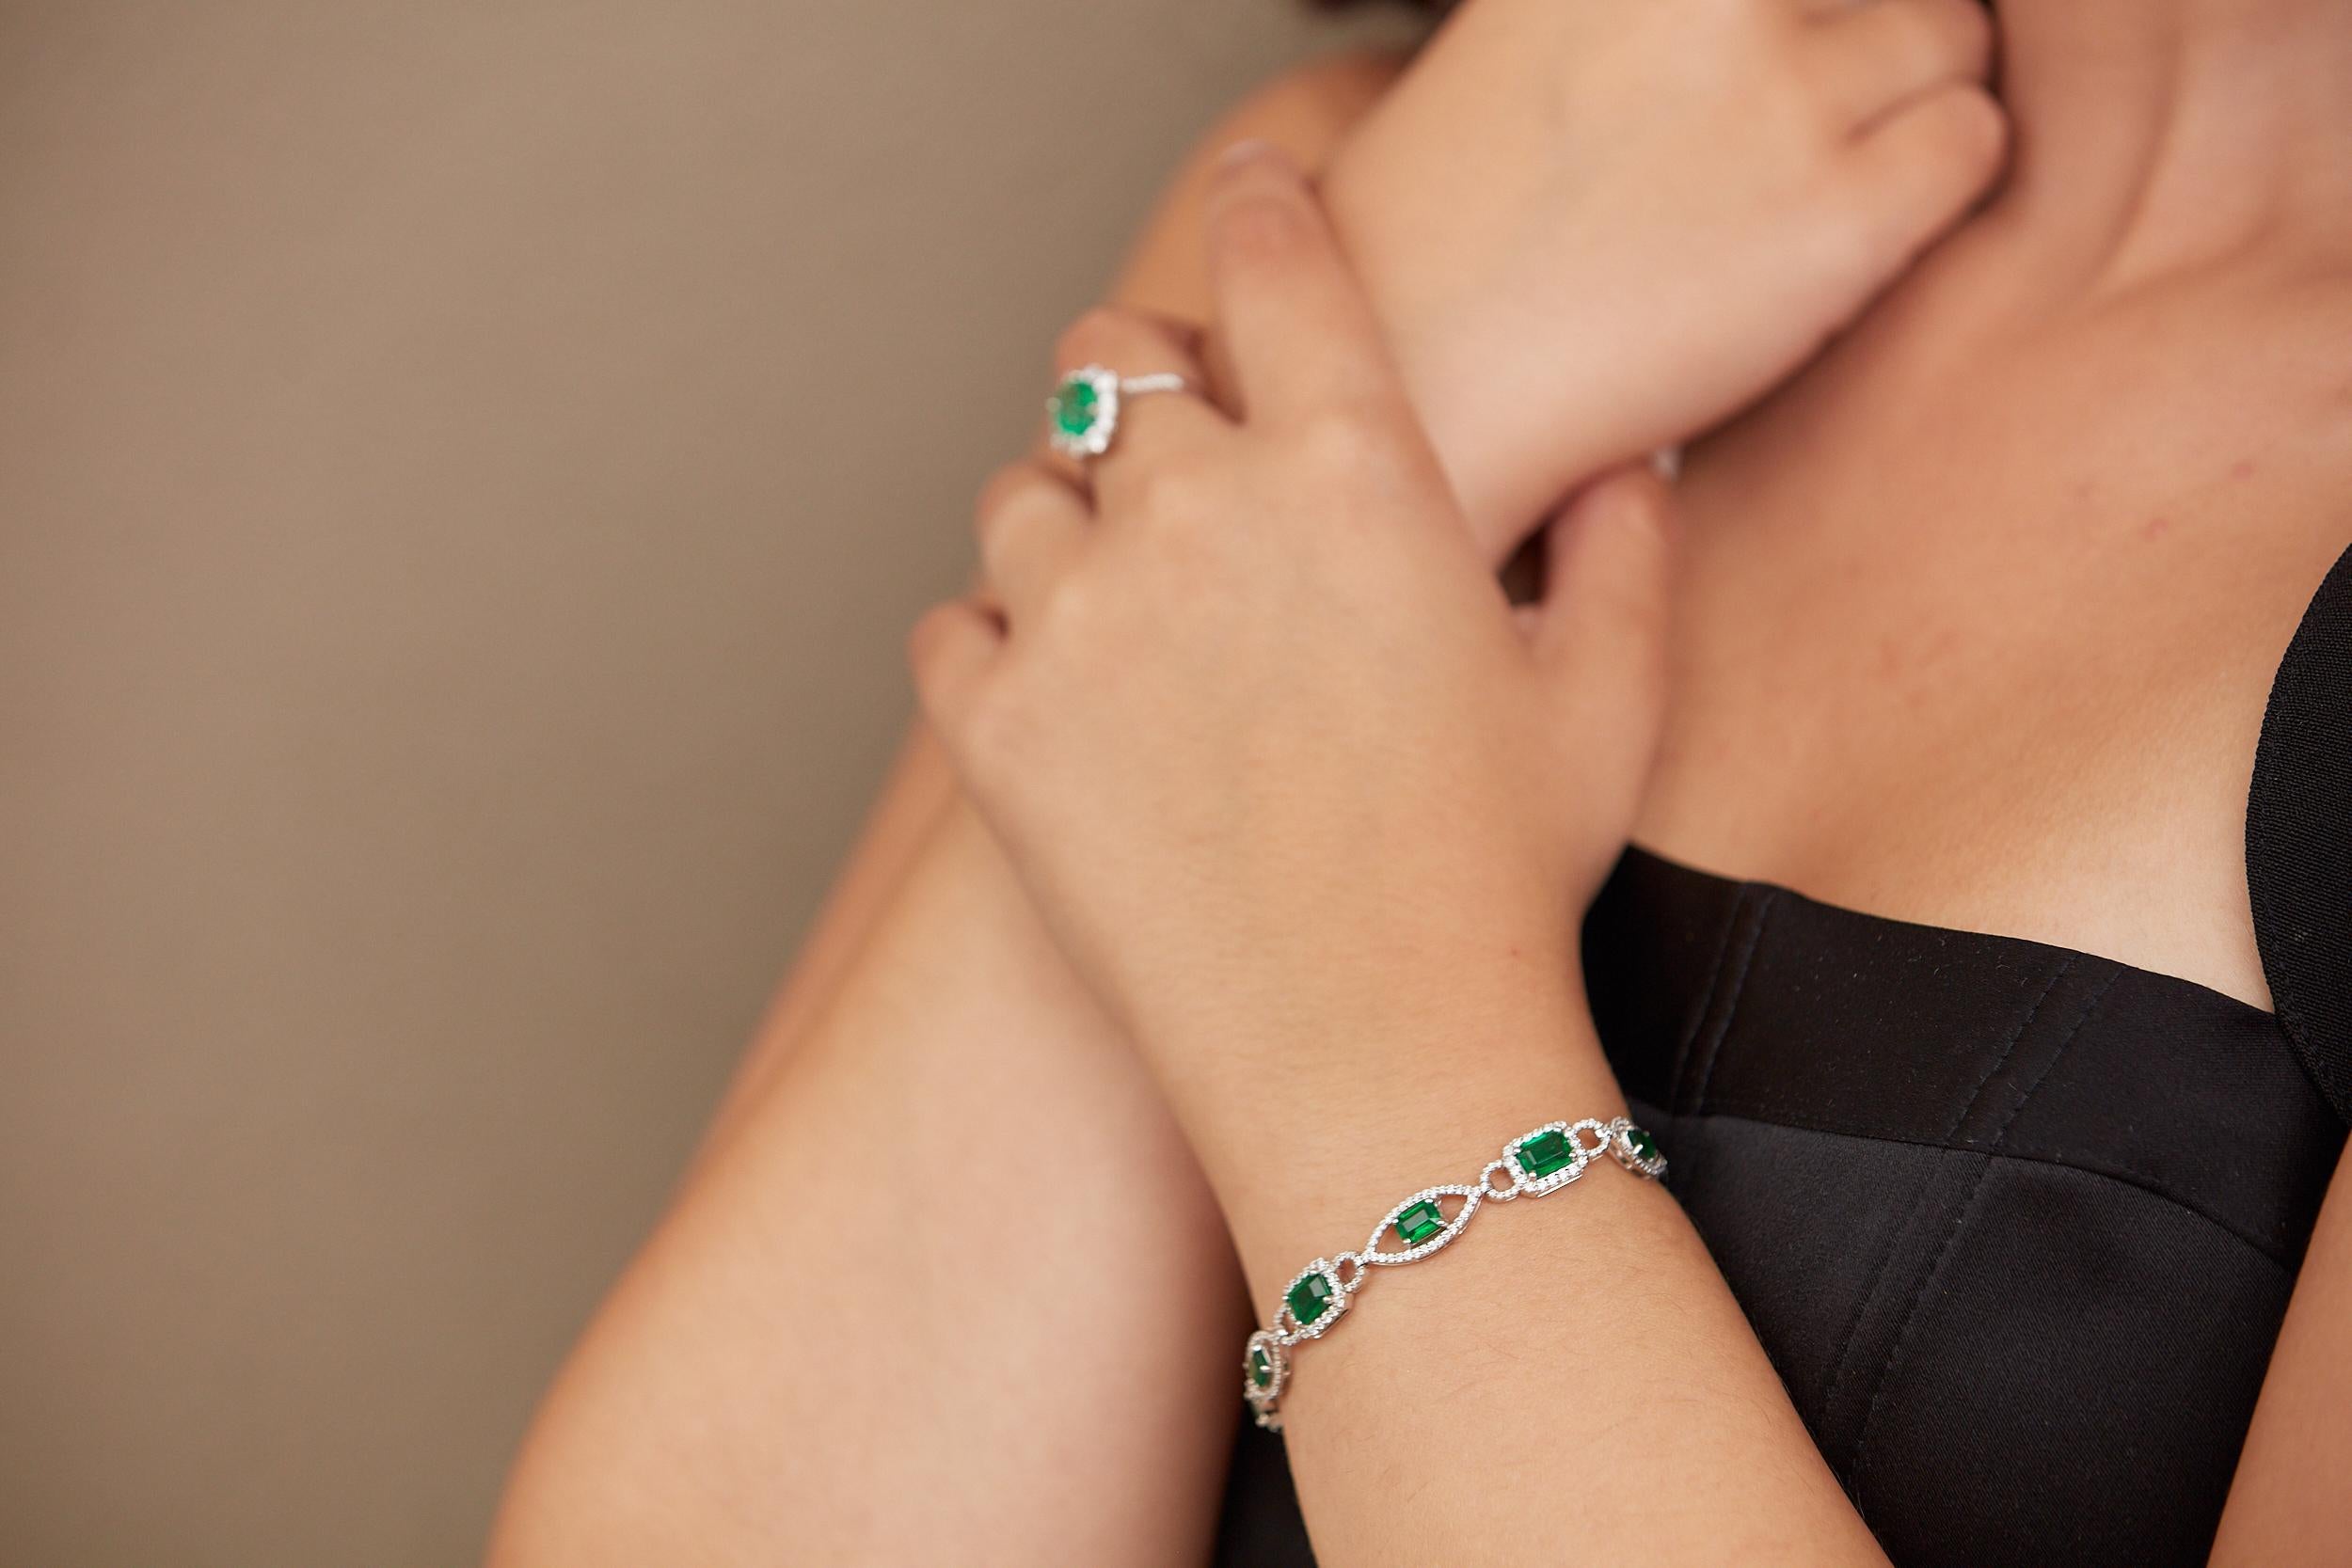 Tresor Diamond Bracelet features 1.96 cts diamond and 6.64 cts emerald in 18k white gold. The Bracelet are an ode to the luxurious yet classic beauty with sparkly diamonds. Their contemporary and modern design makes them versatile in their use. The